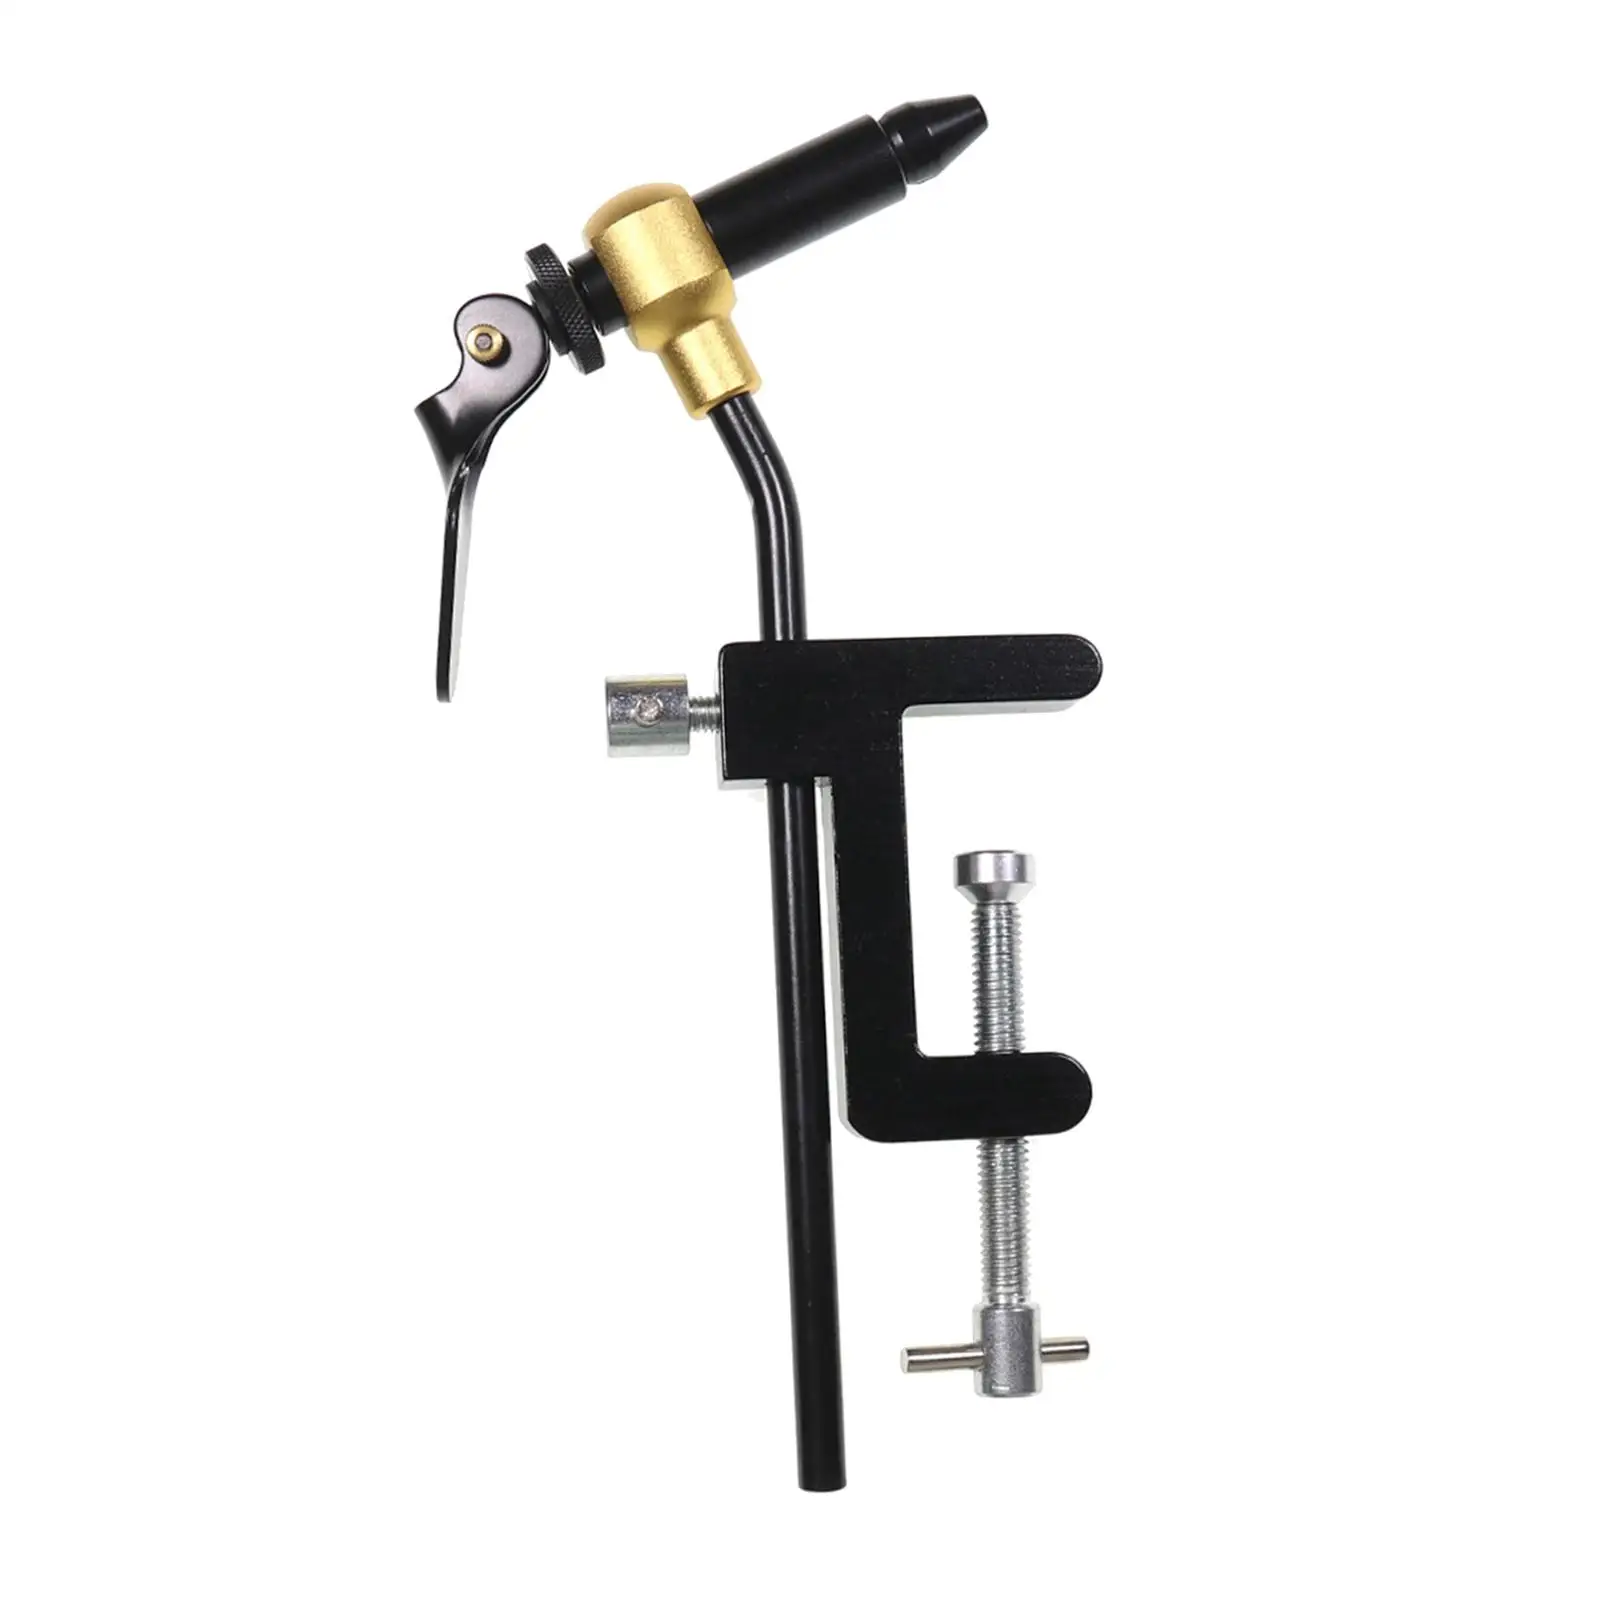 Fly Tying Vise C Clamp Steel Hard Jaws 360 Rotating Precision Table Vise of Fly Tying Tools Fly Hook Tool